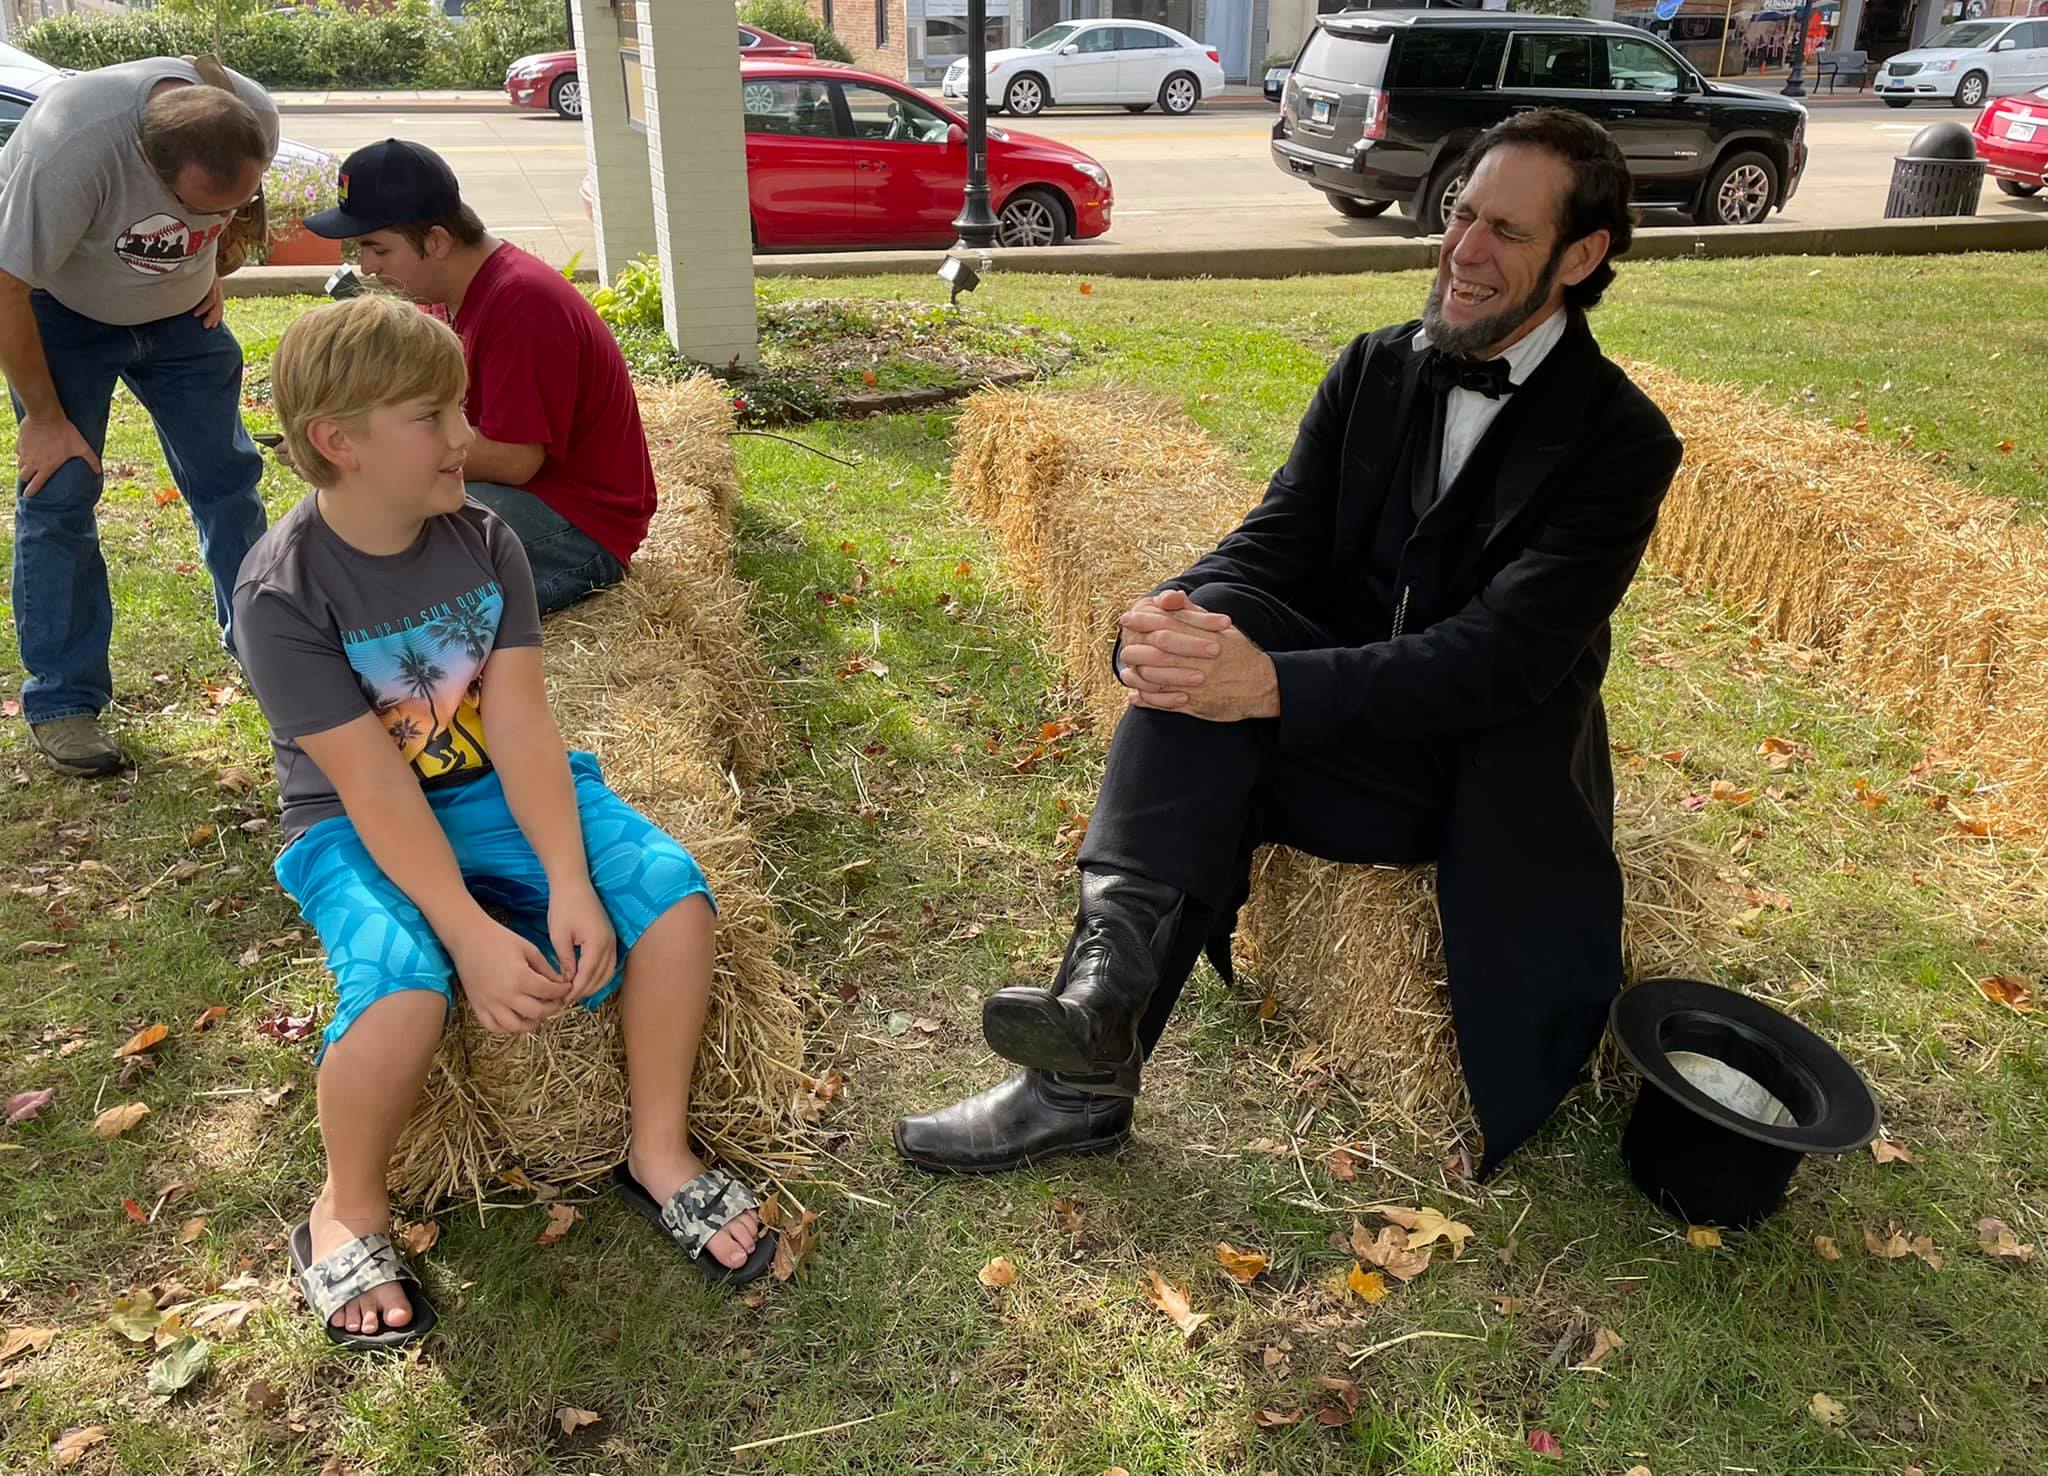 Abe Lincoln impersonator at the Grand Levee Celebration in Vandalia